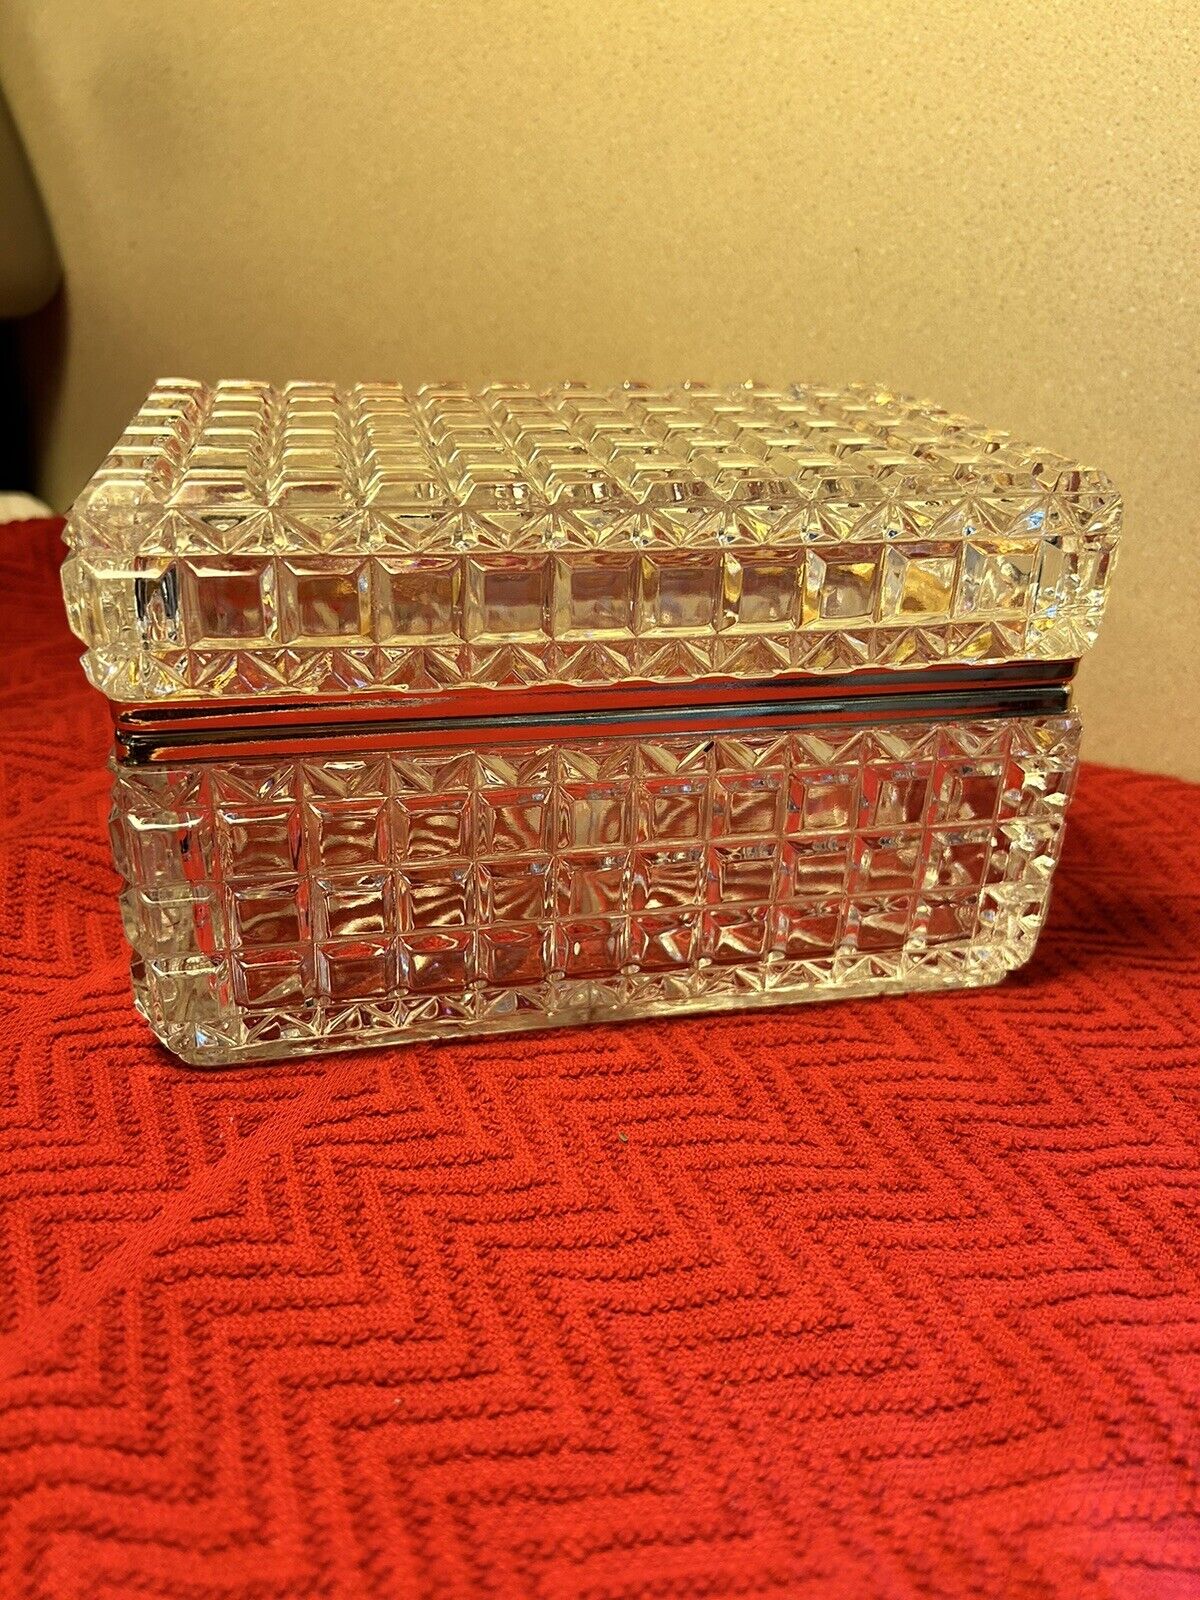 Vintage French Baccarat Style Jewelry Casket Box Very Heavy 